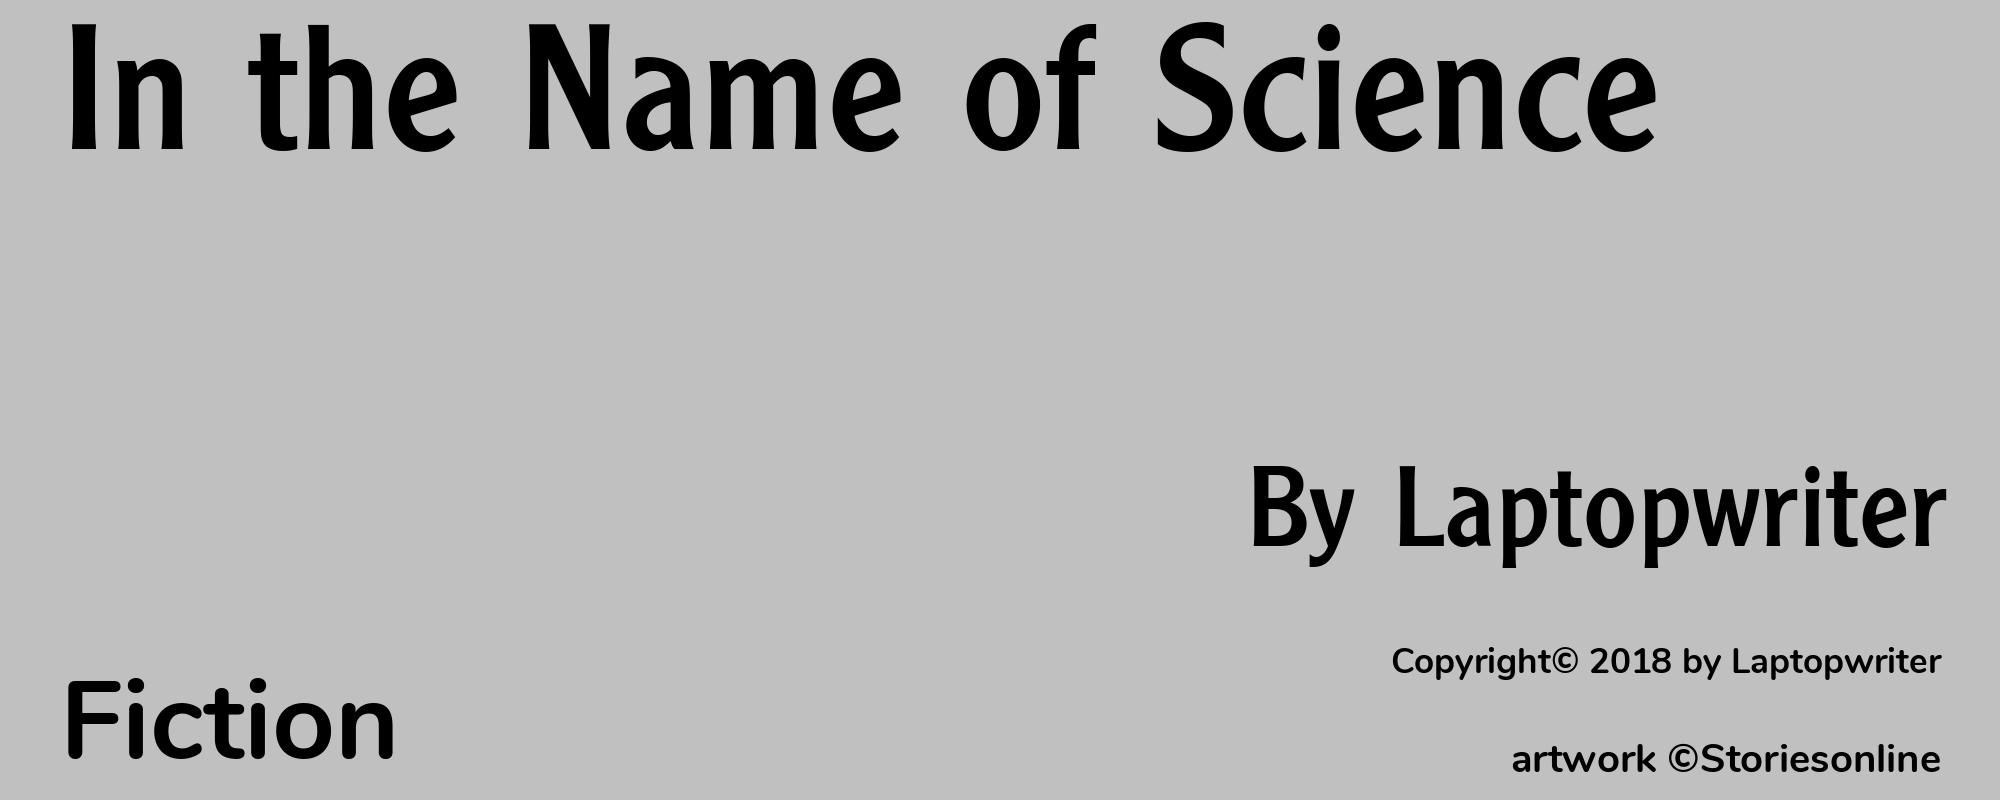 In the Name of Science - Cover